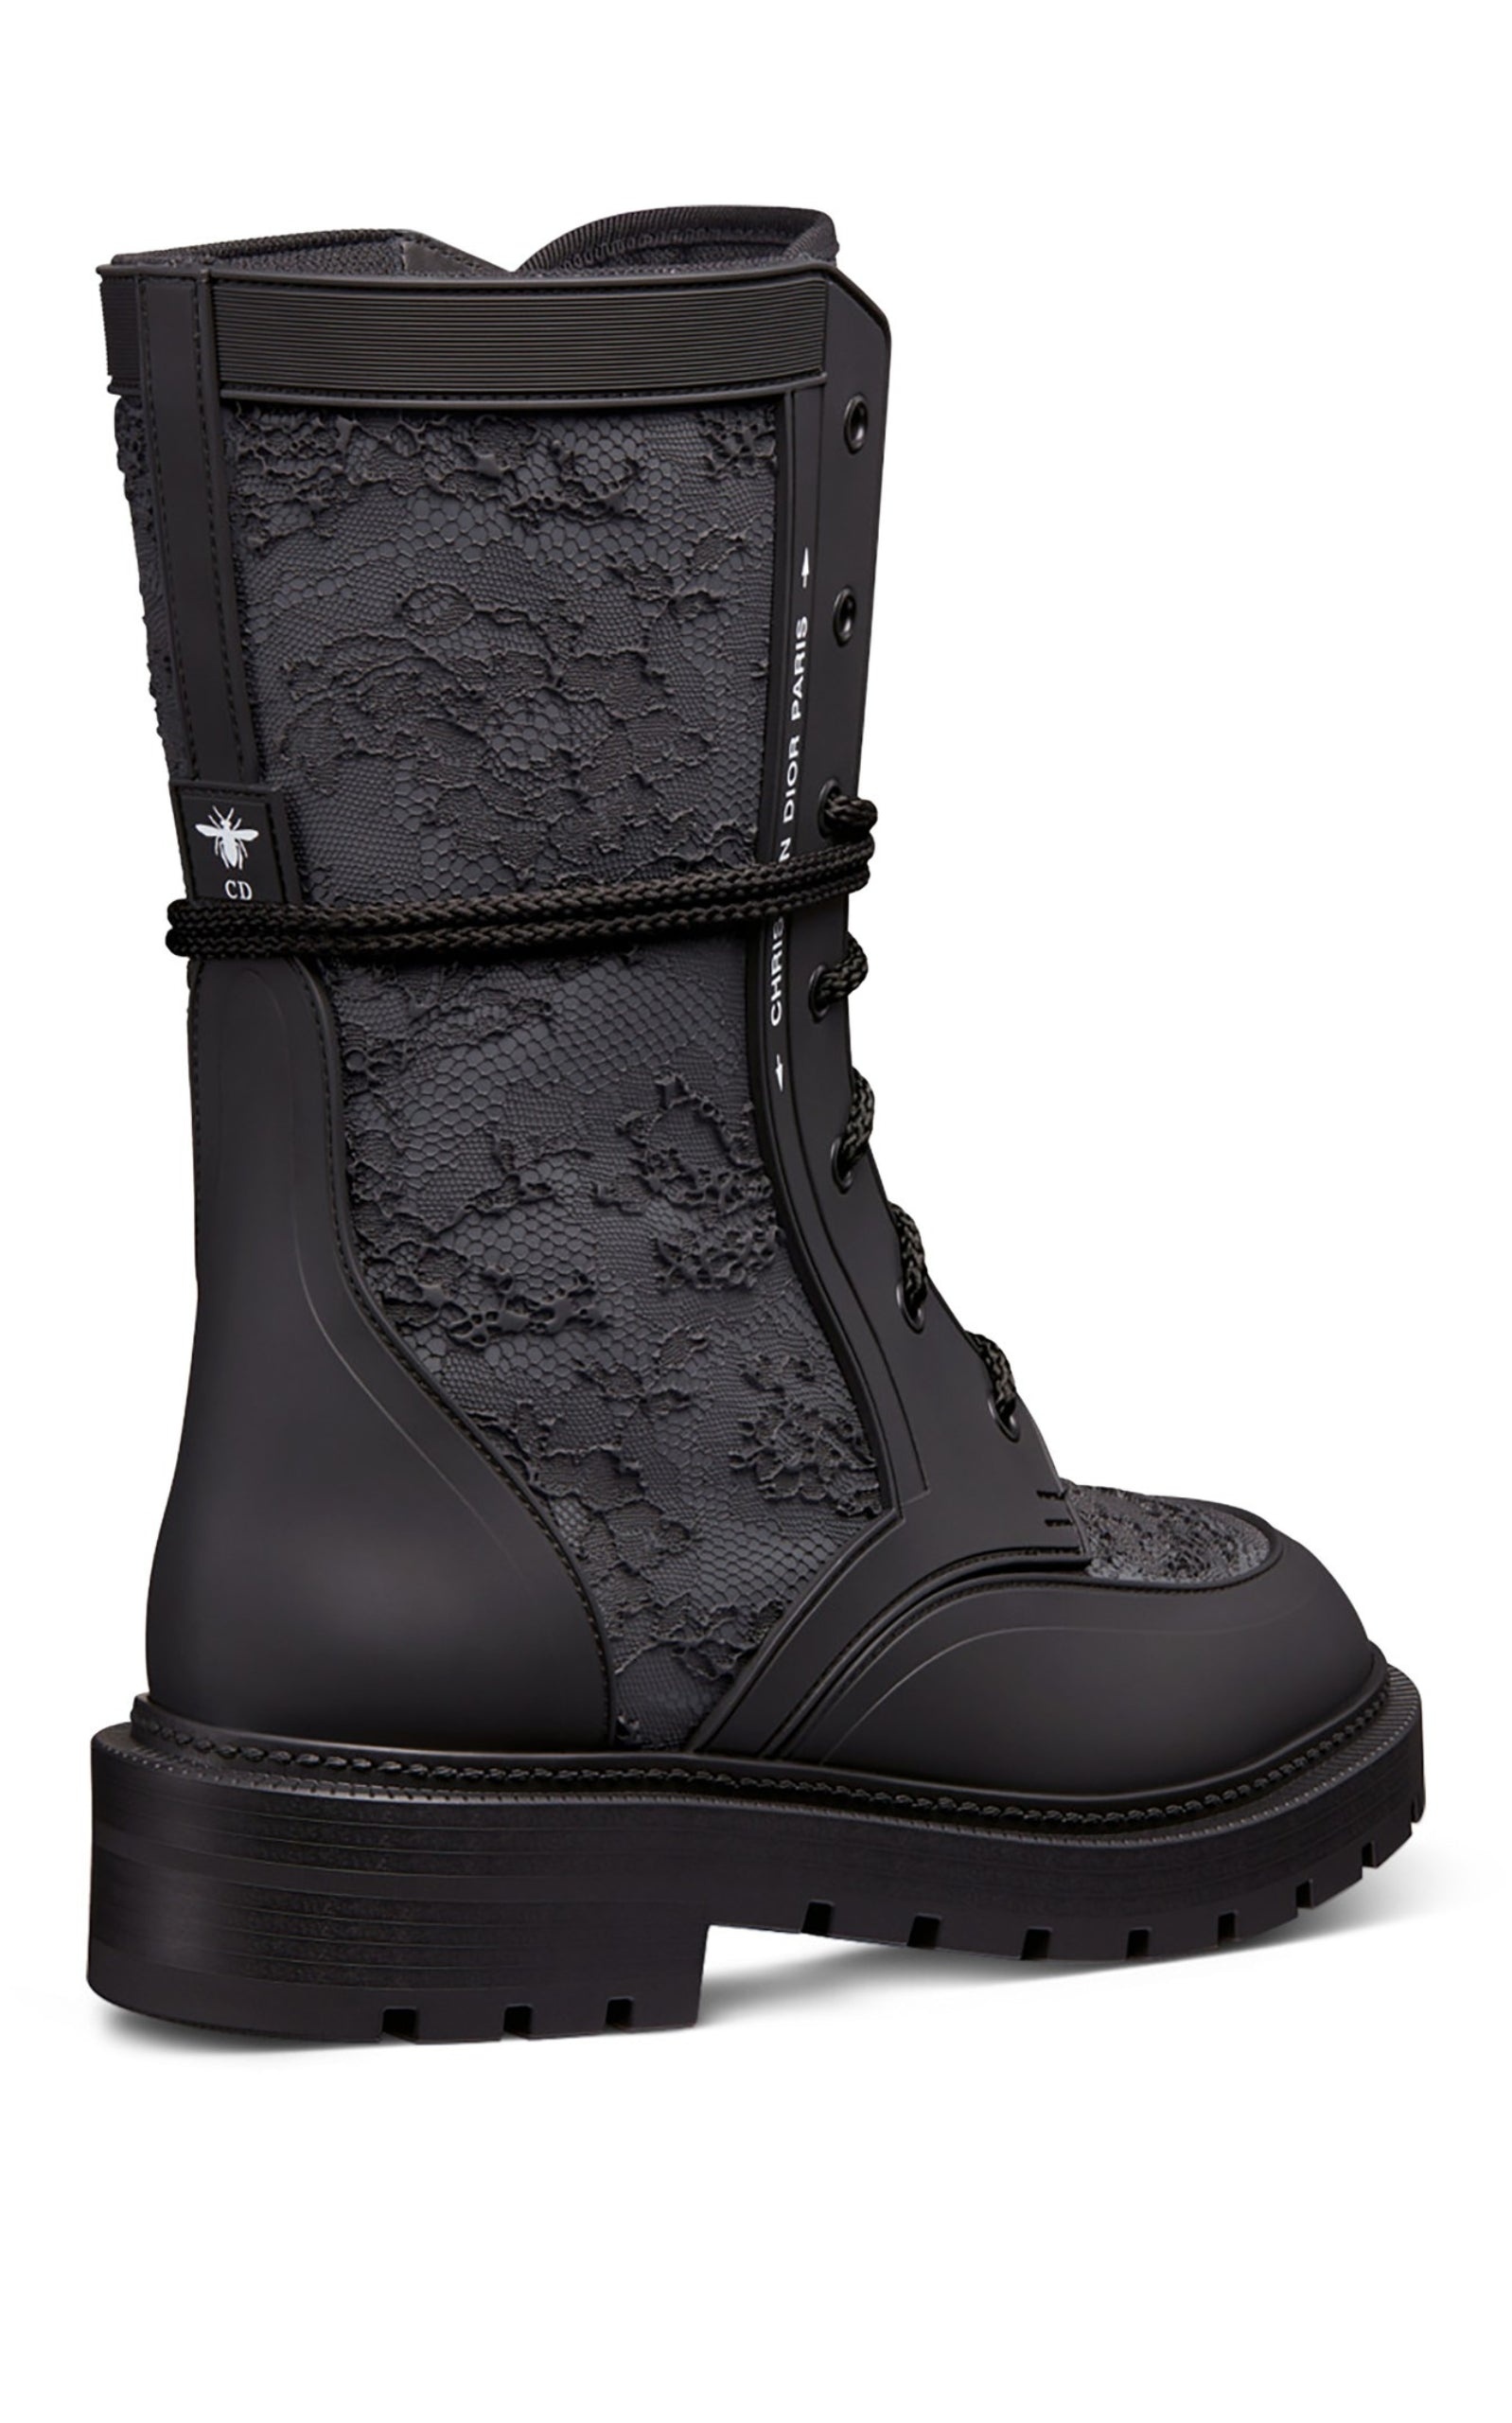 Urban-D Ankle Boots - 2